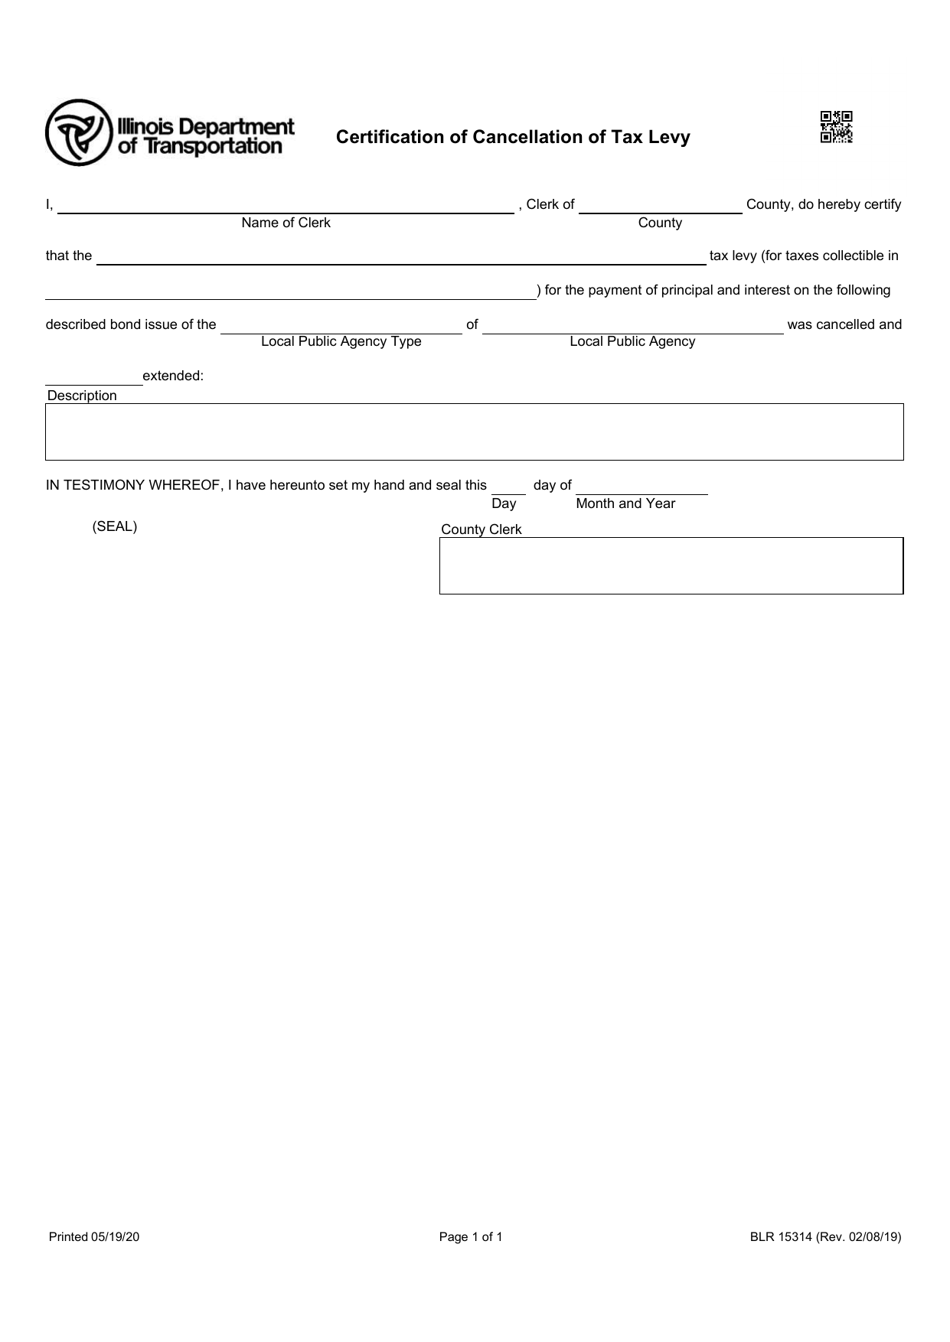 Form BLR15314 Certification of Cancellation of Tax Levy - Illinois, Page 1